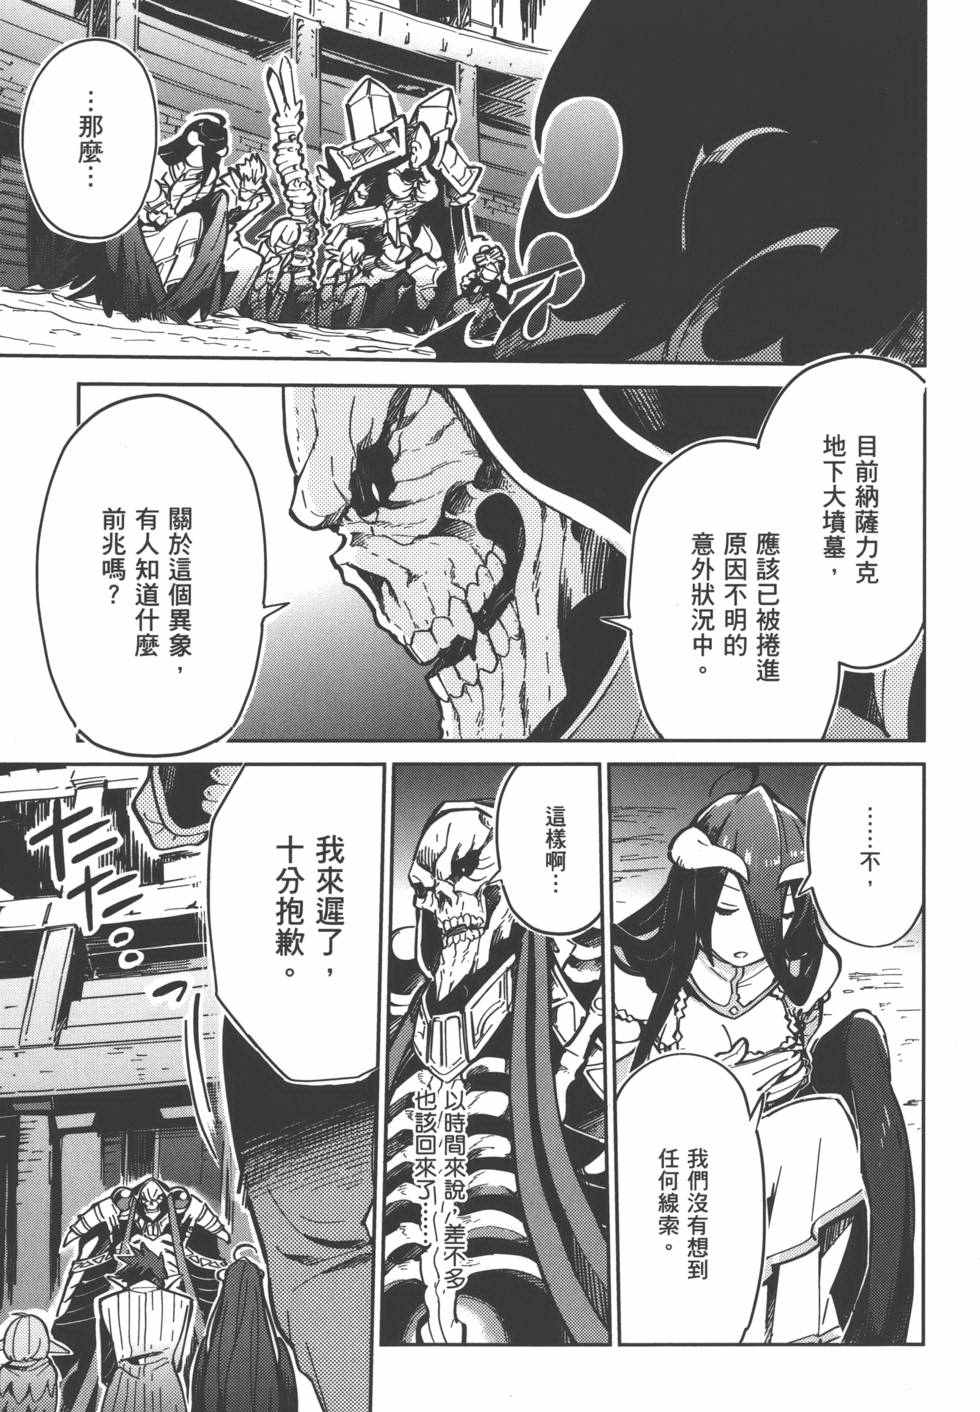 OVERLORD - 第1卷(2/4) - 3